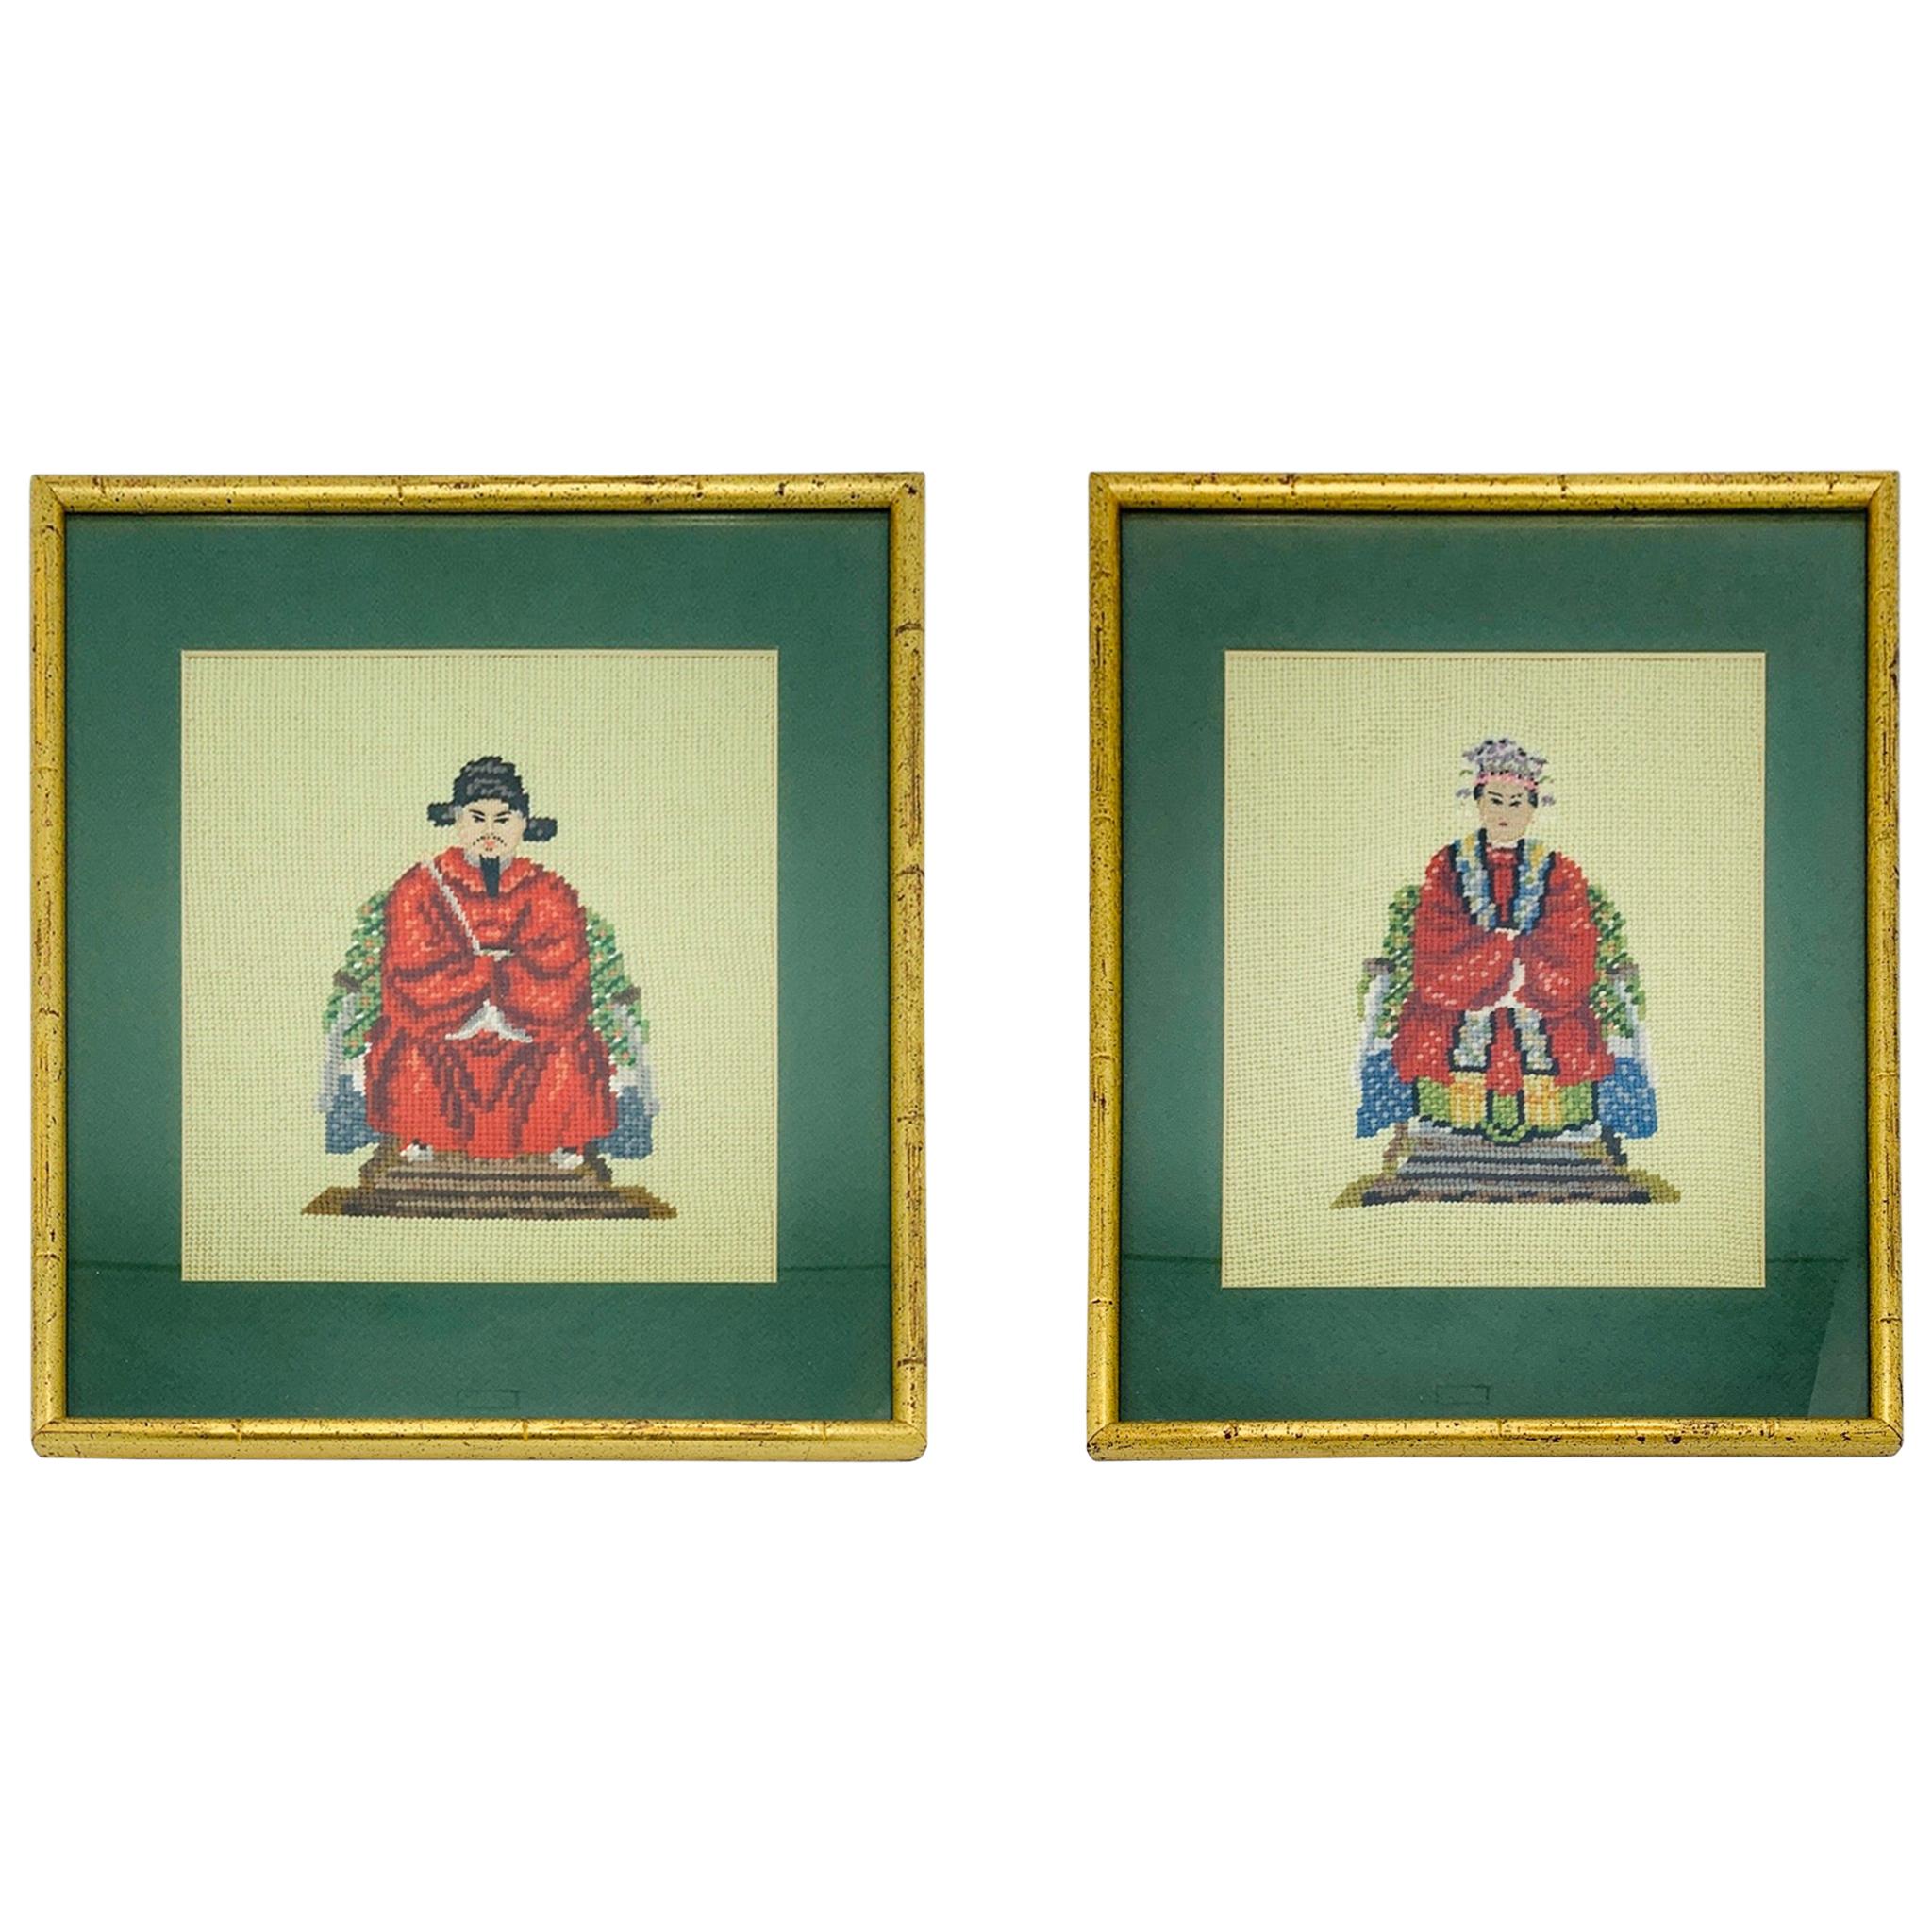 1960s Chinoiserie Emperor and Empress Framed Needlepoint Textile Art, Pair For Sale